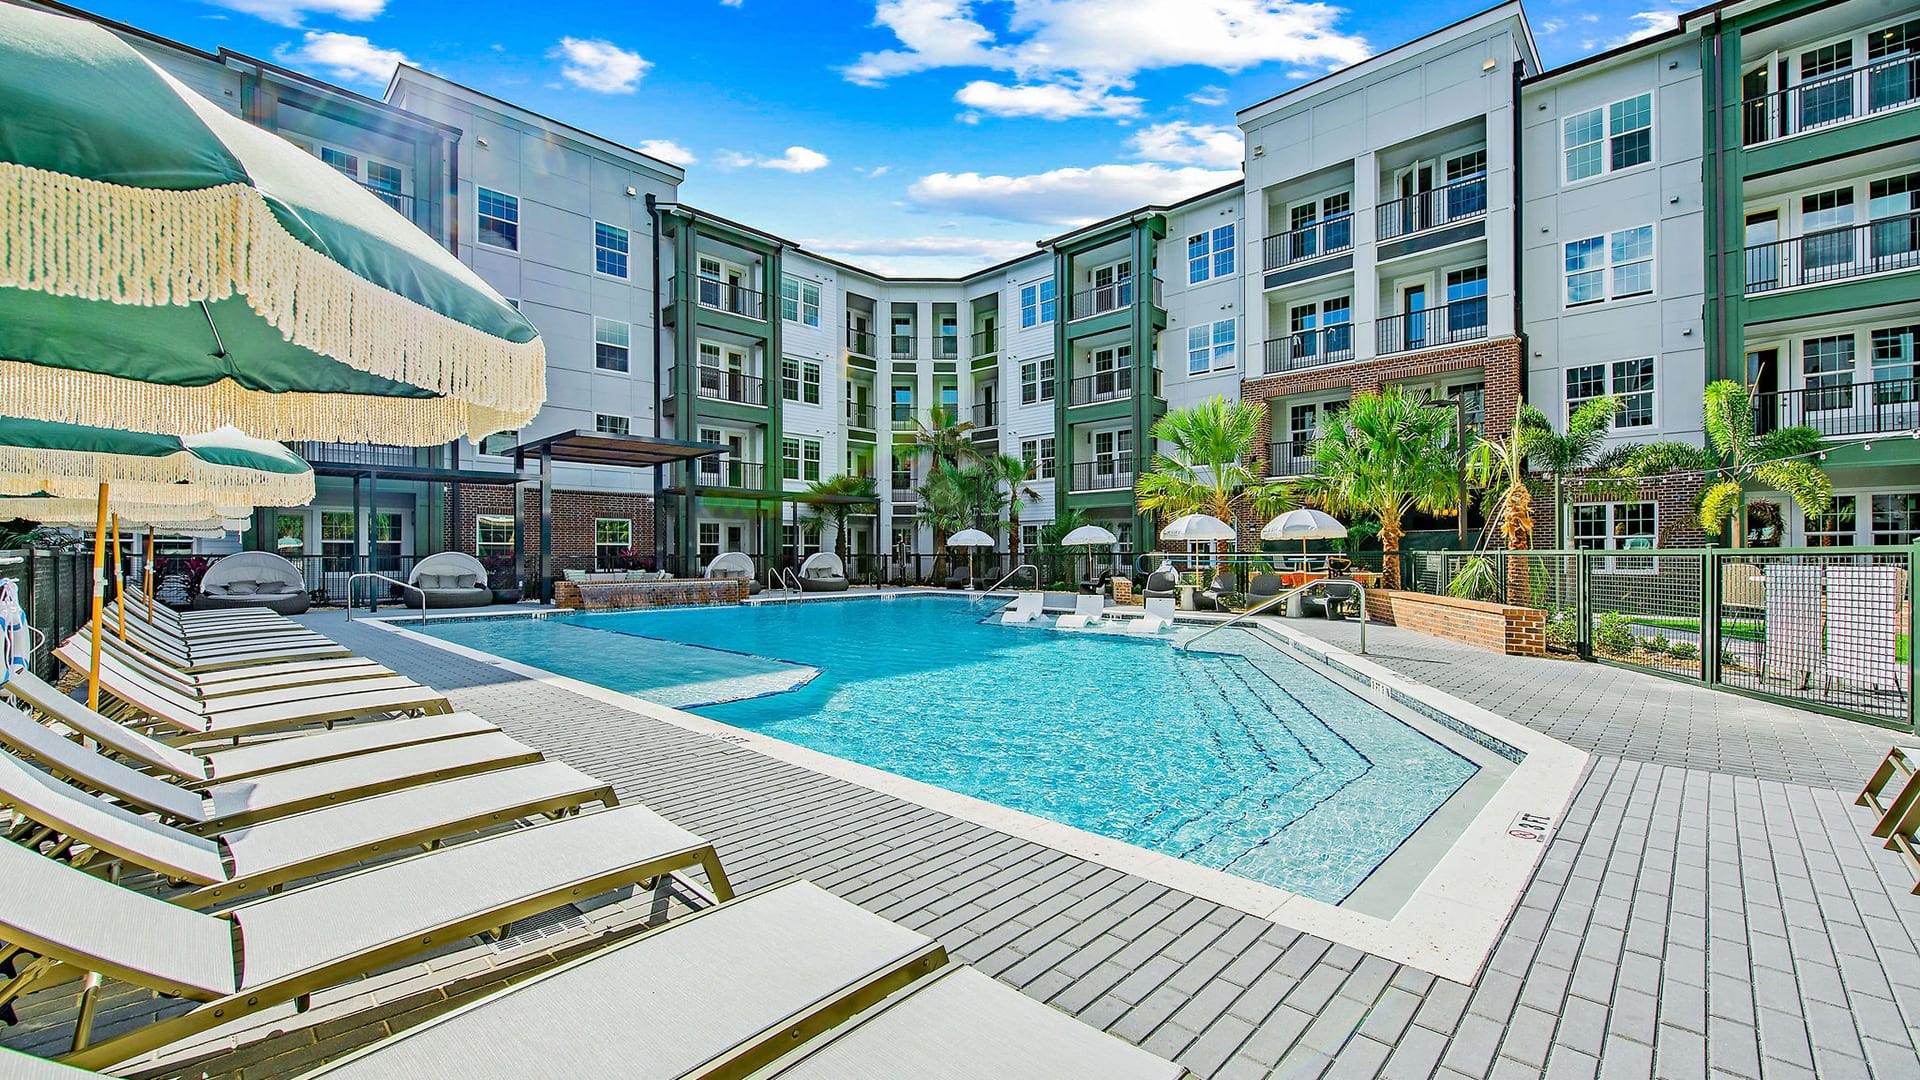 Resort-Style Swimming Pool With Cabanas at Our Apartments Near Brandon, FL